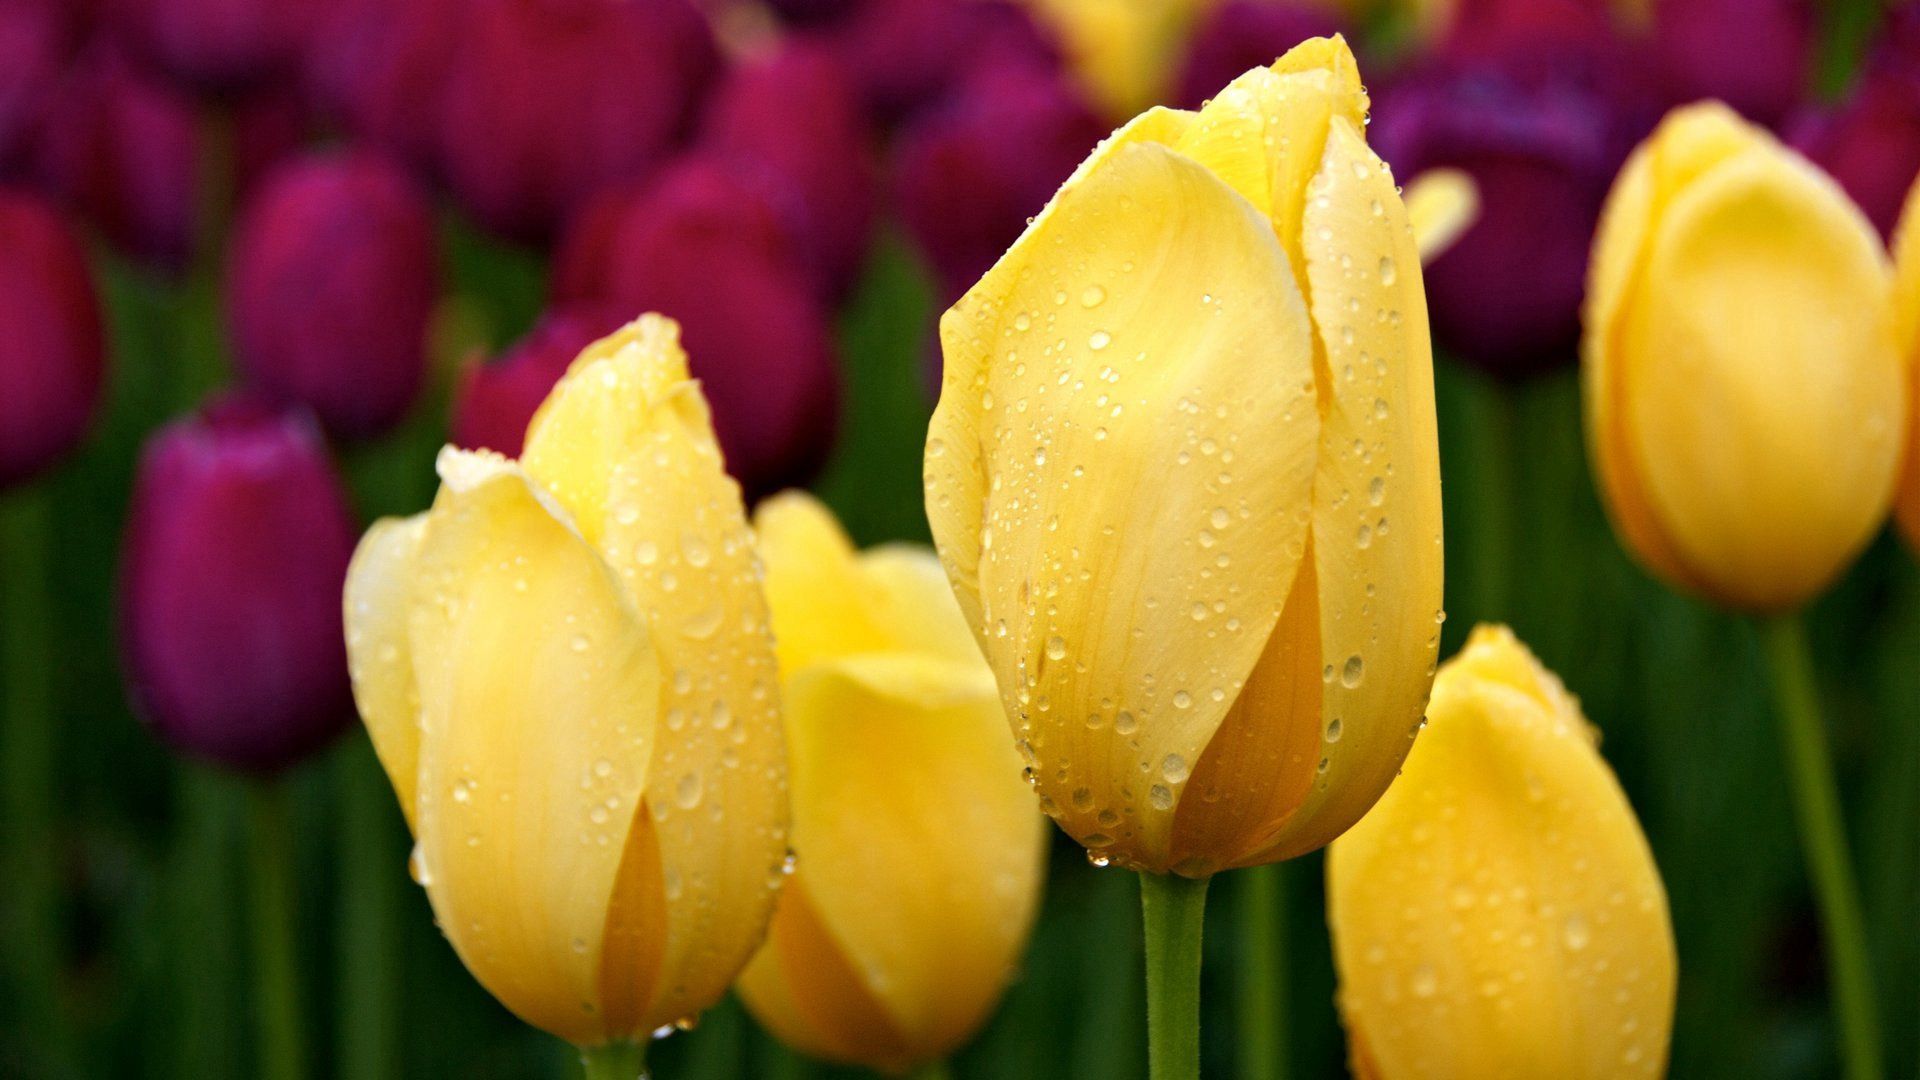 drops, greens, flowers, tulips, buds, different HD for desktop 1080p